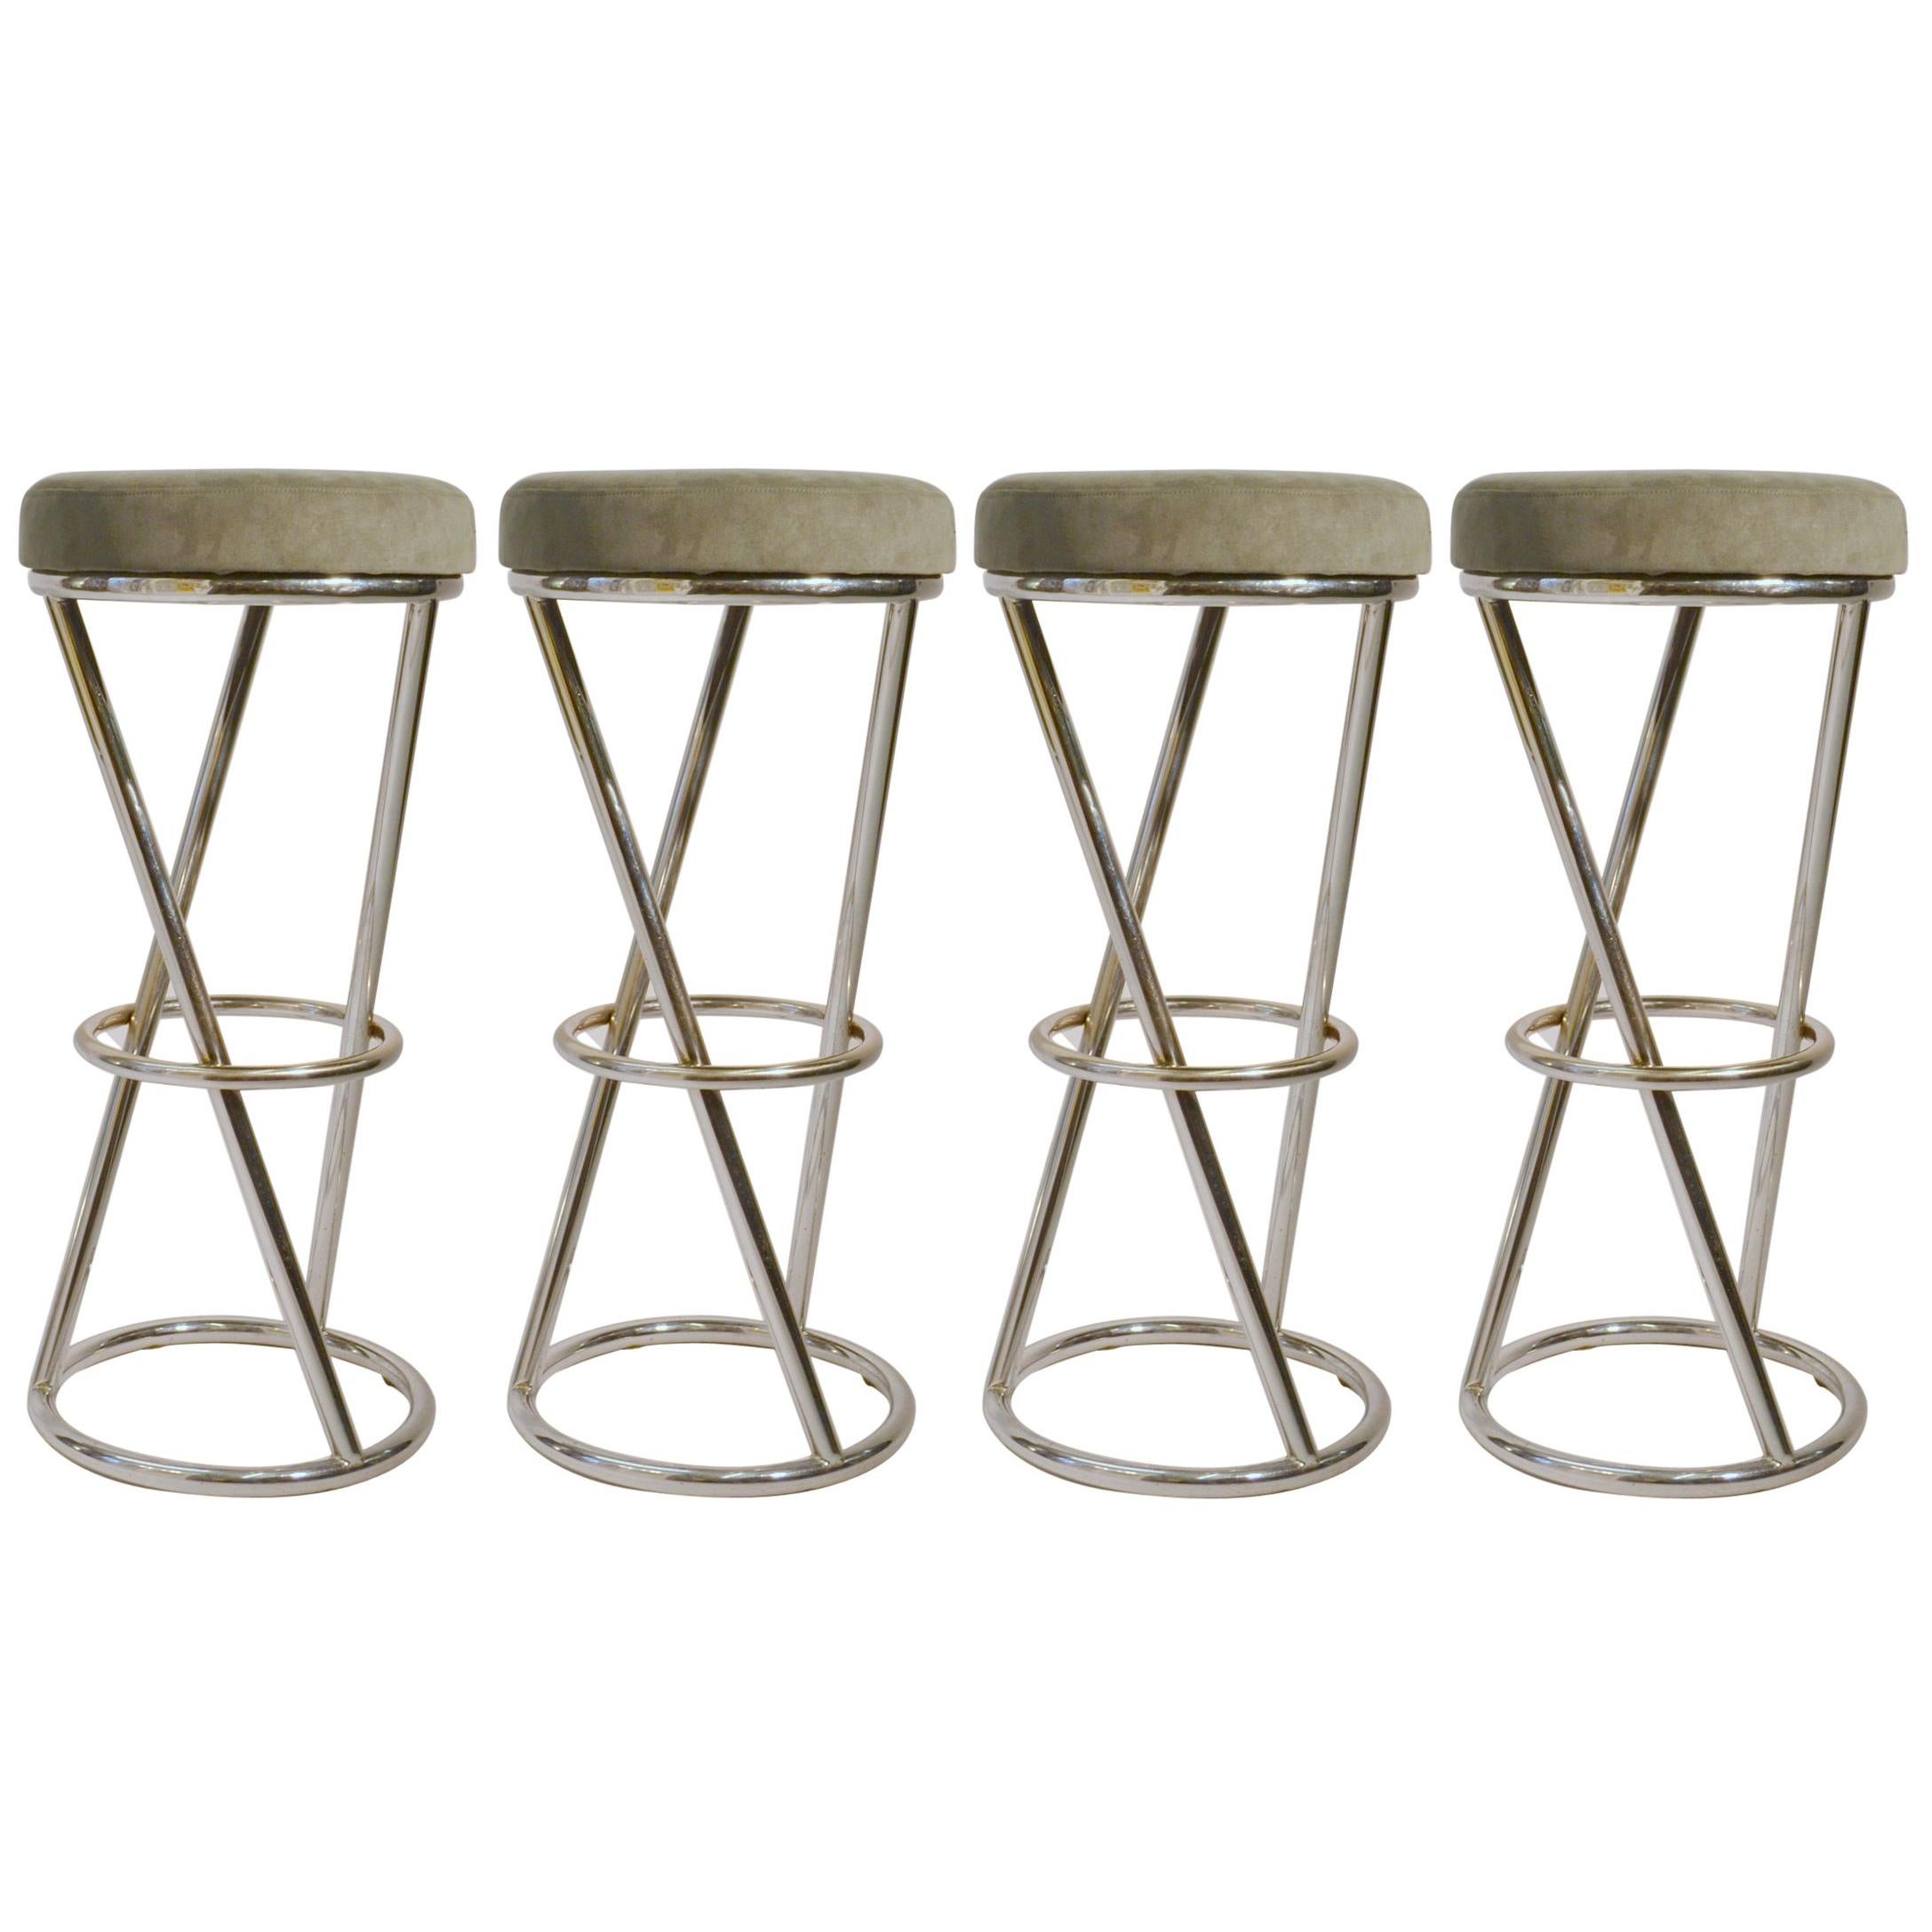 Modernist Bar Stools by Pierre Chareau in Tubular Brass or Chrome